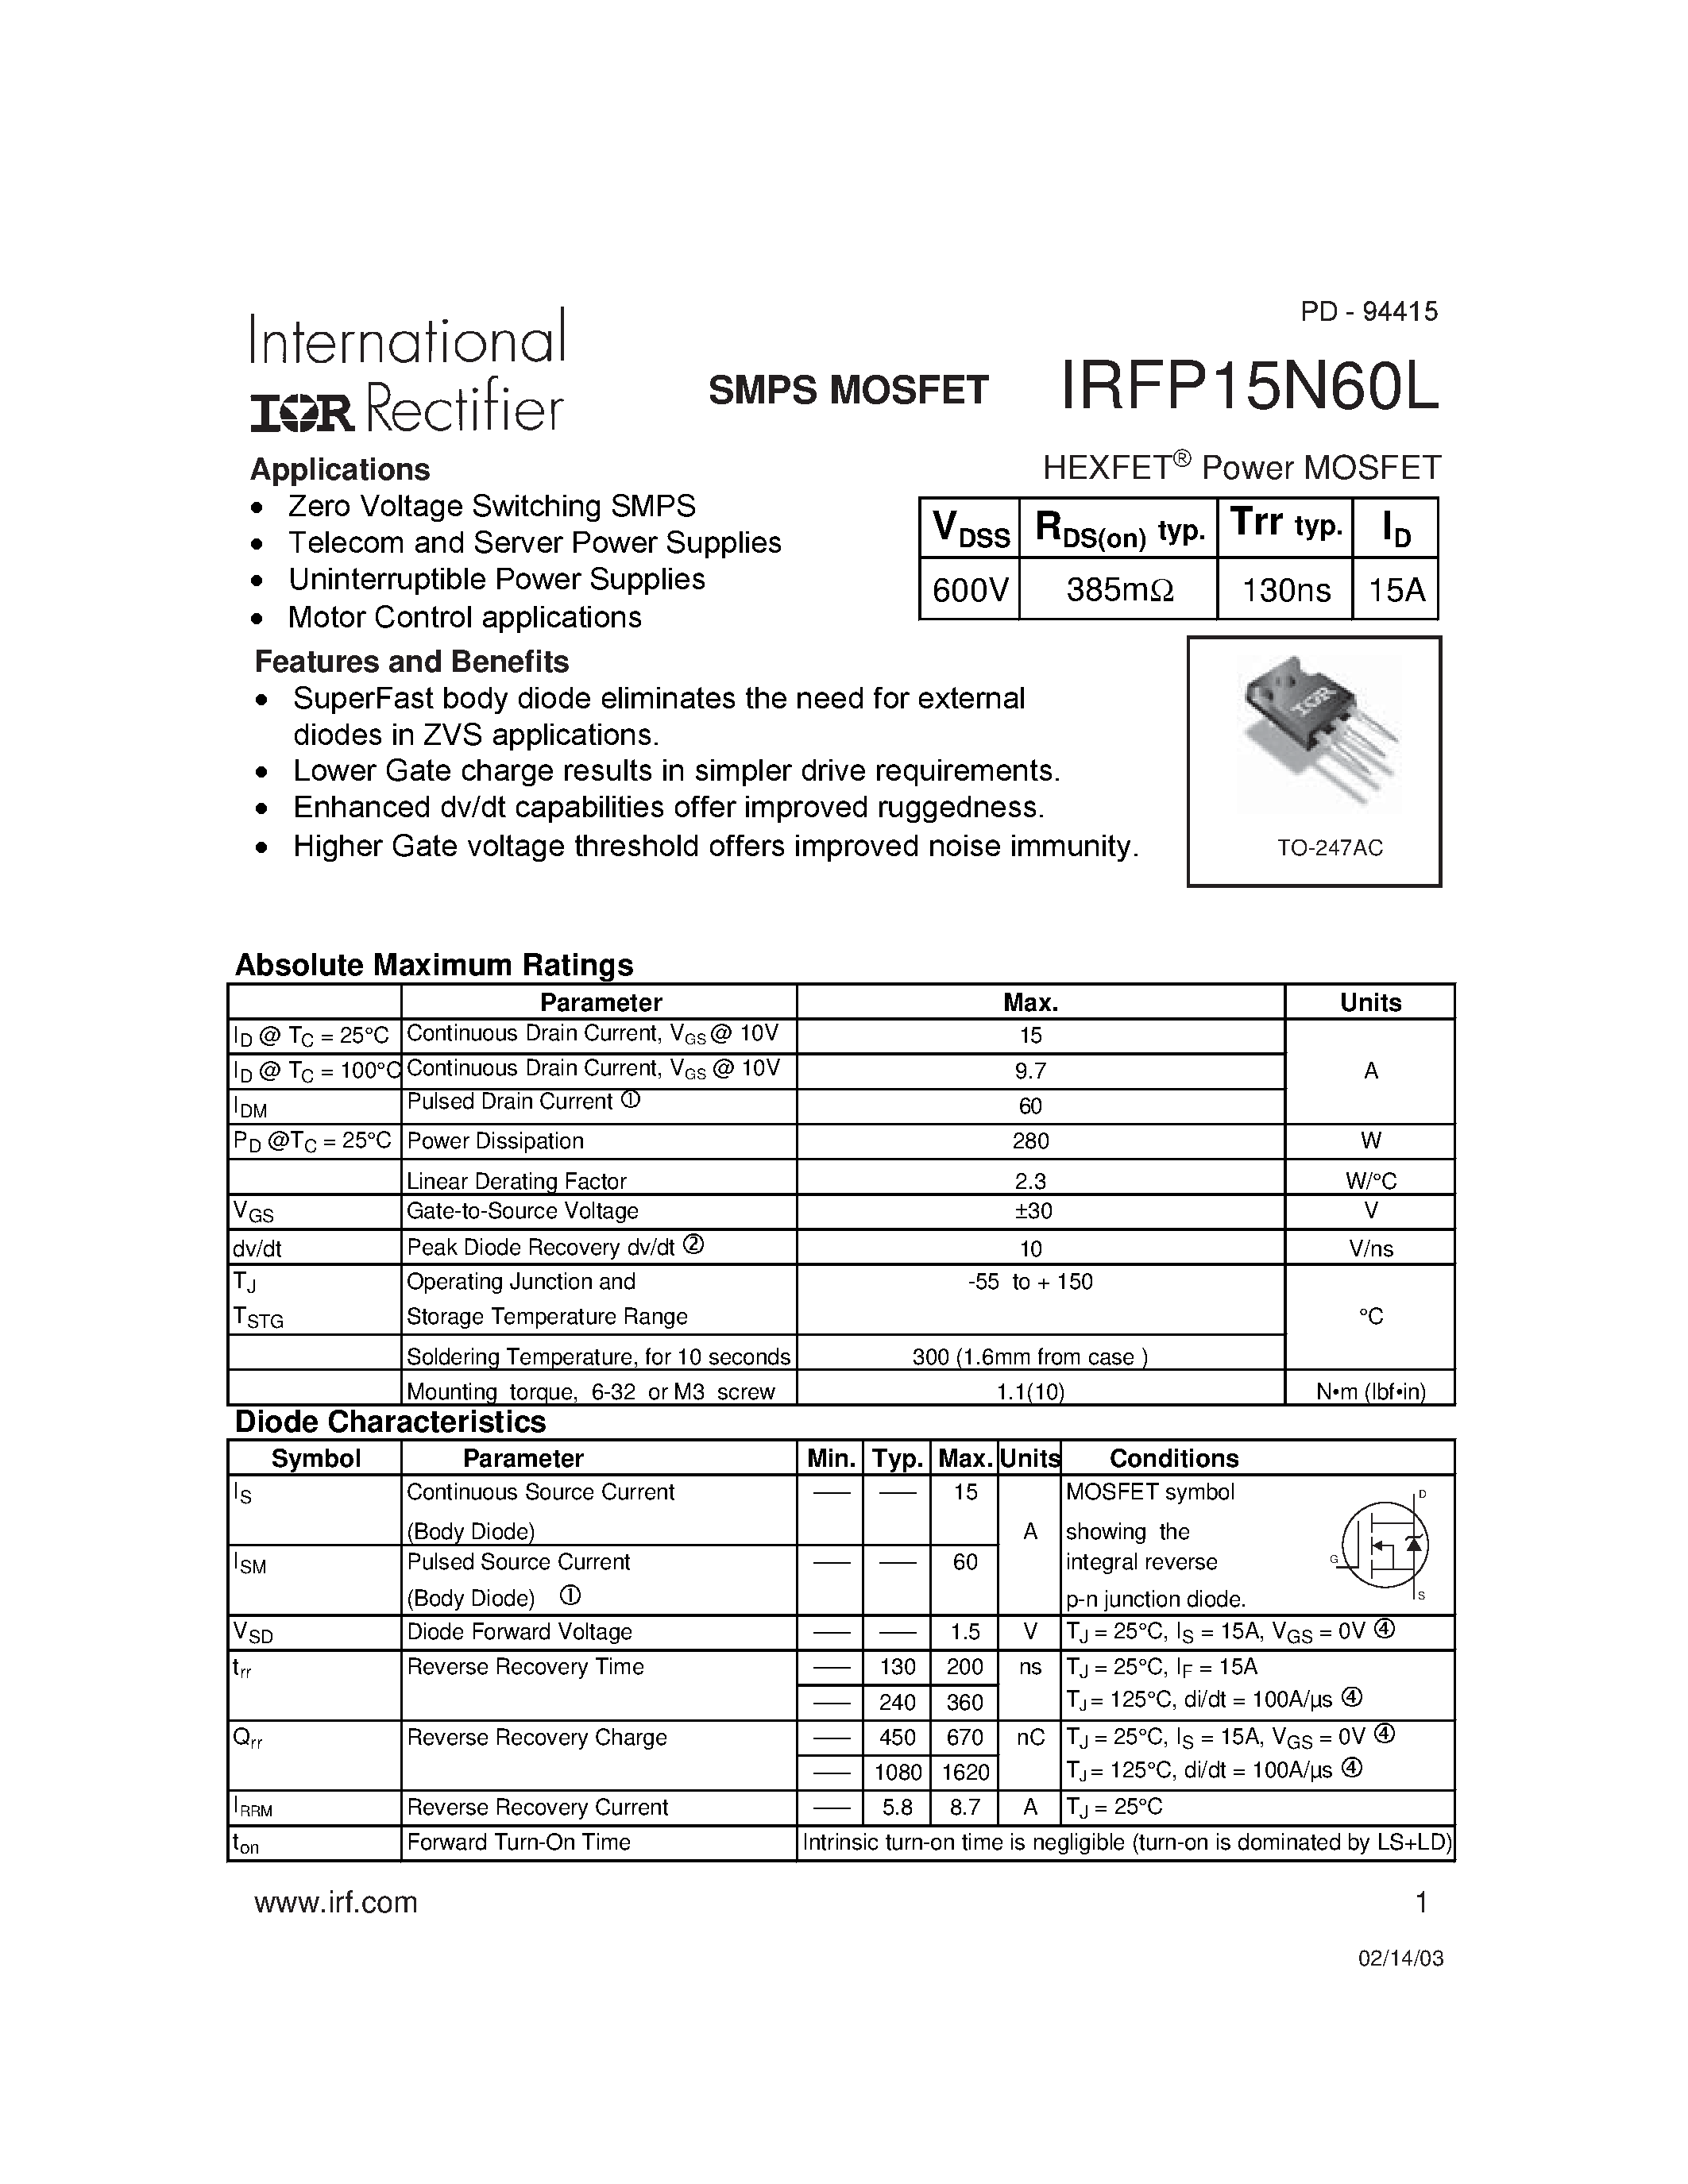 Datasheet IRFP15N60L - HEXFET Power MOSFET page 1